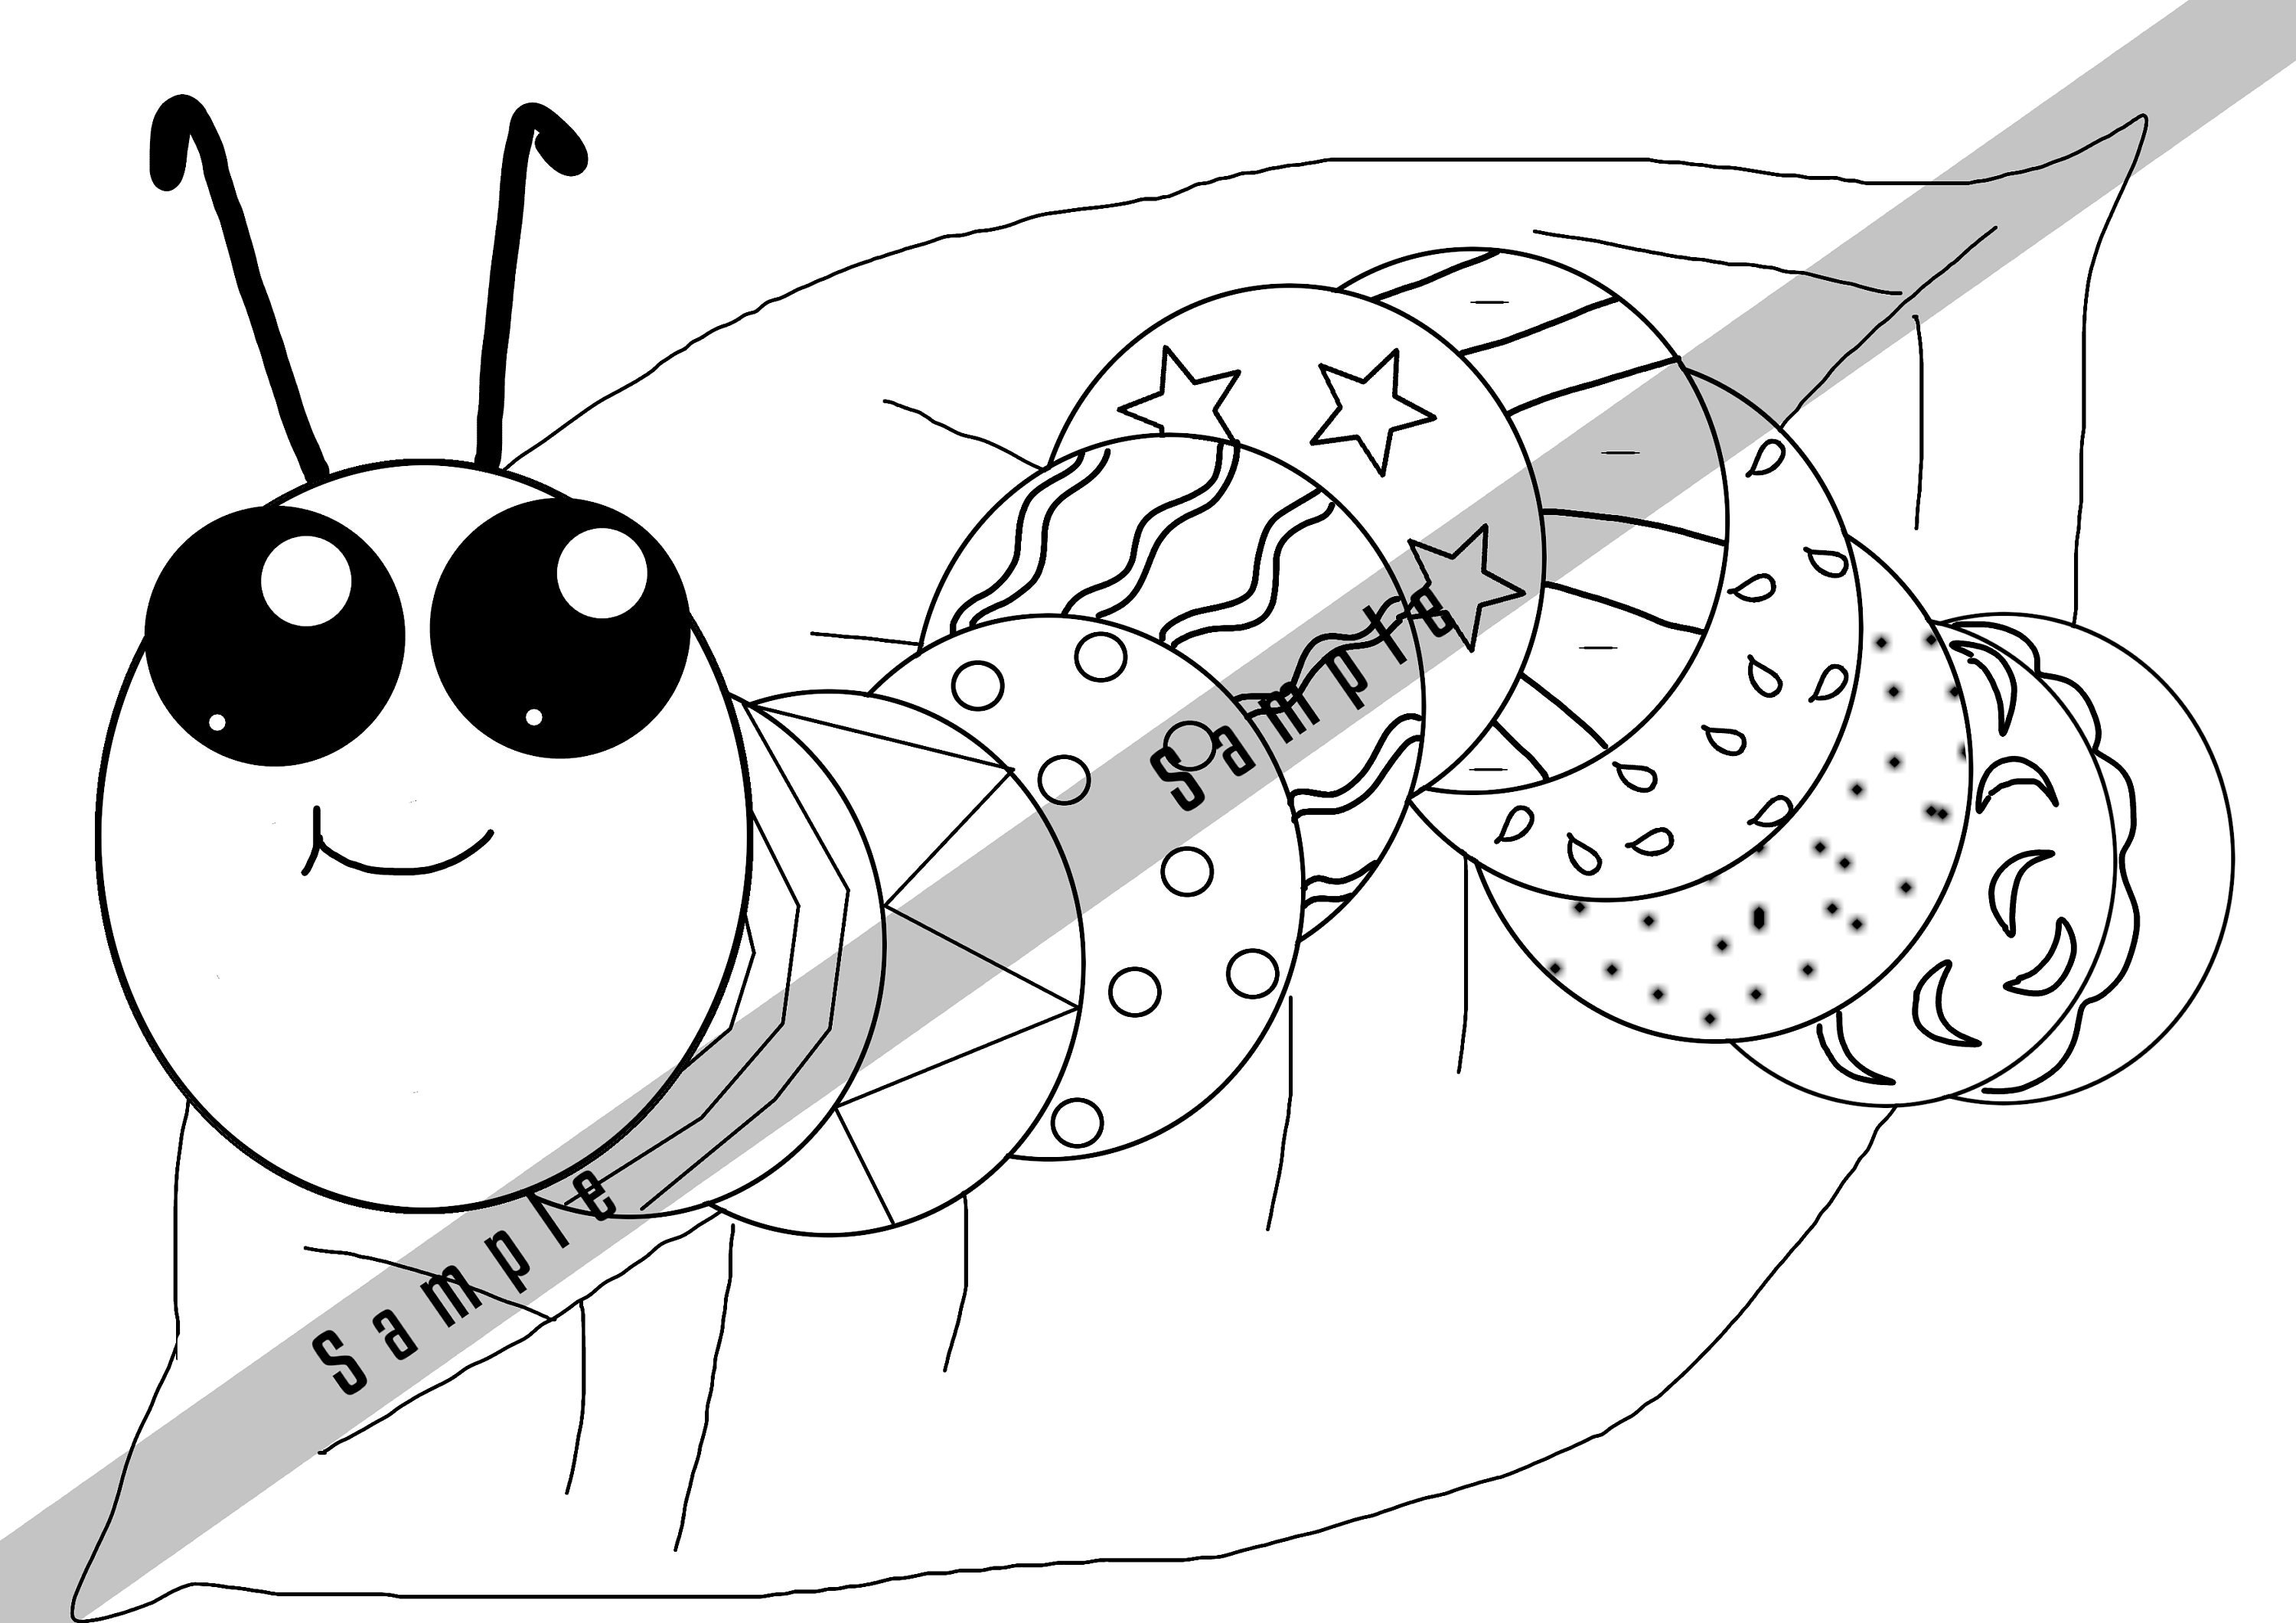 Caterpillar Colouring Page Digital Copy | Etsy